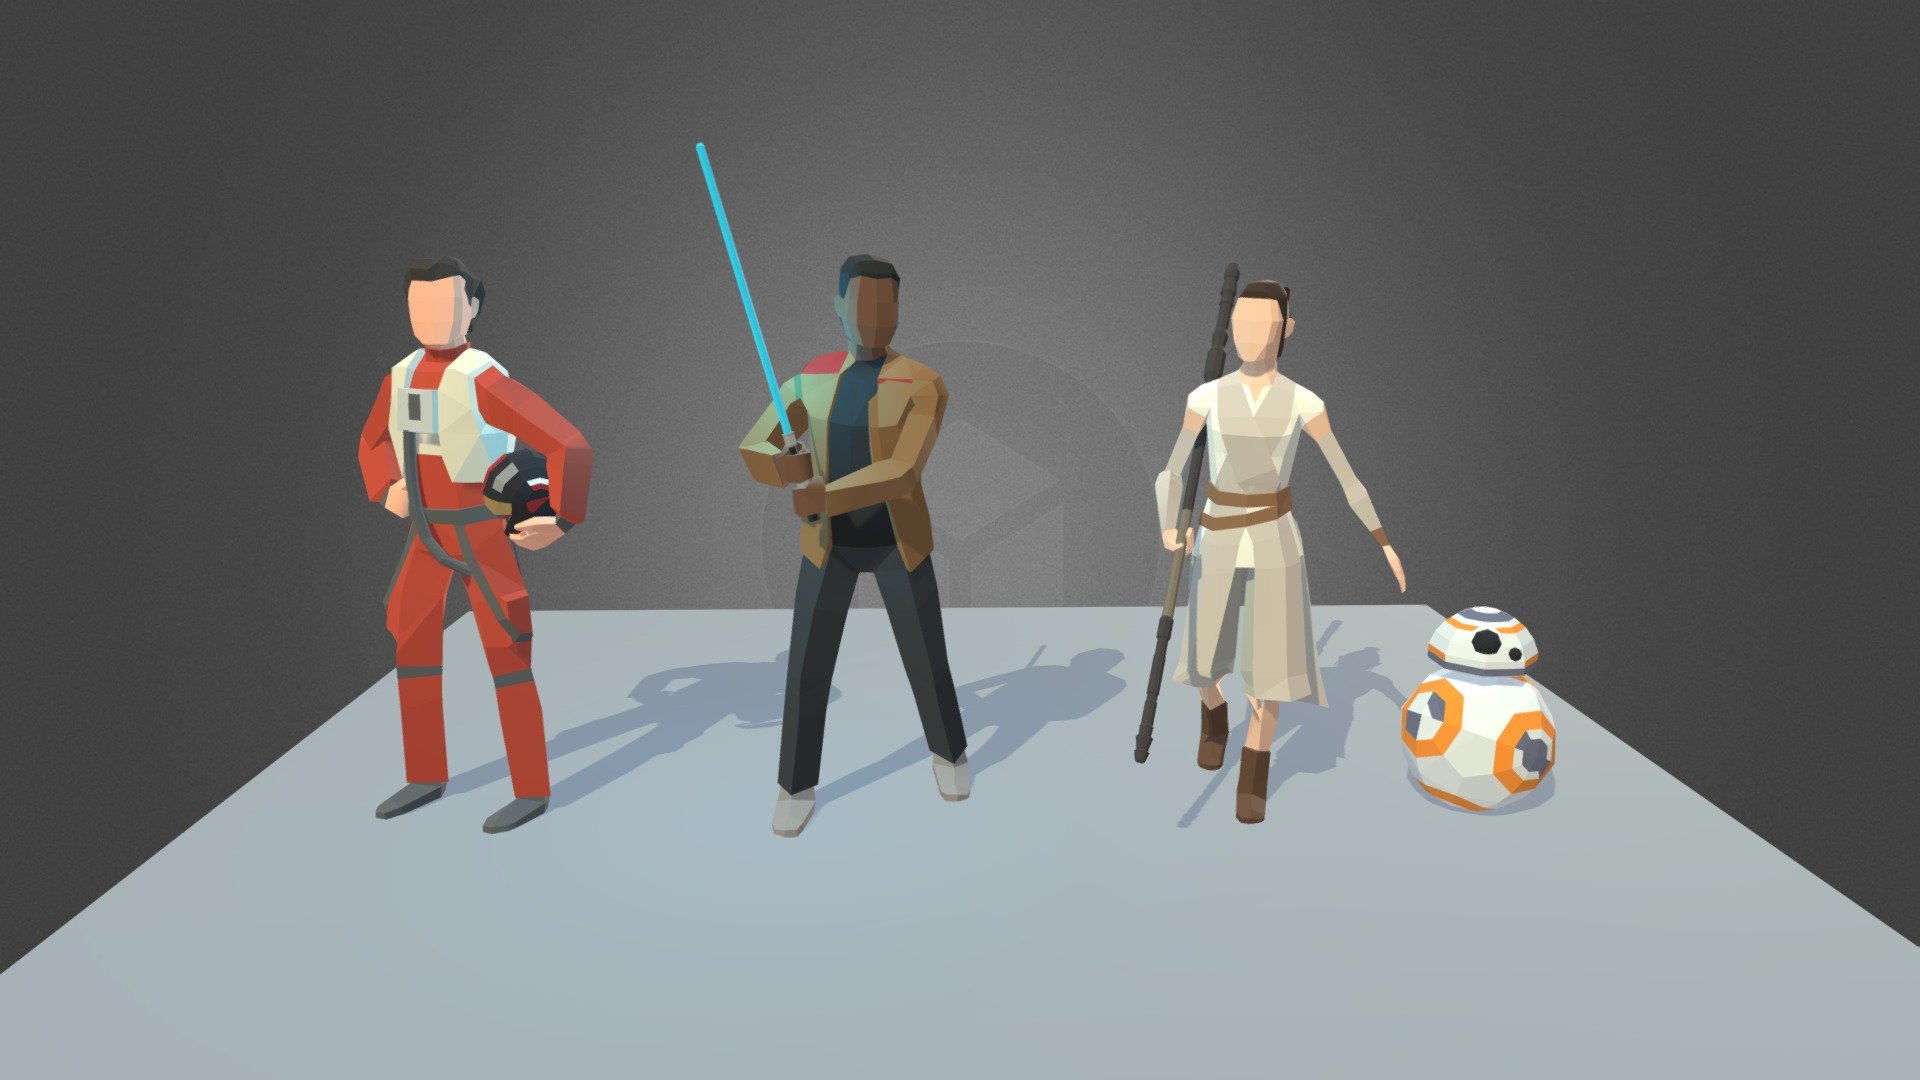 Fanart of Star Wars: The Force Awakens characters in low poly style - The Force Awakens Lowpoly - Download Free 3D model by Fi Silva (@fisilva) 3d model